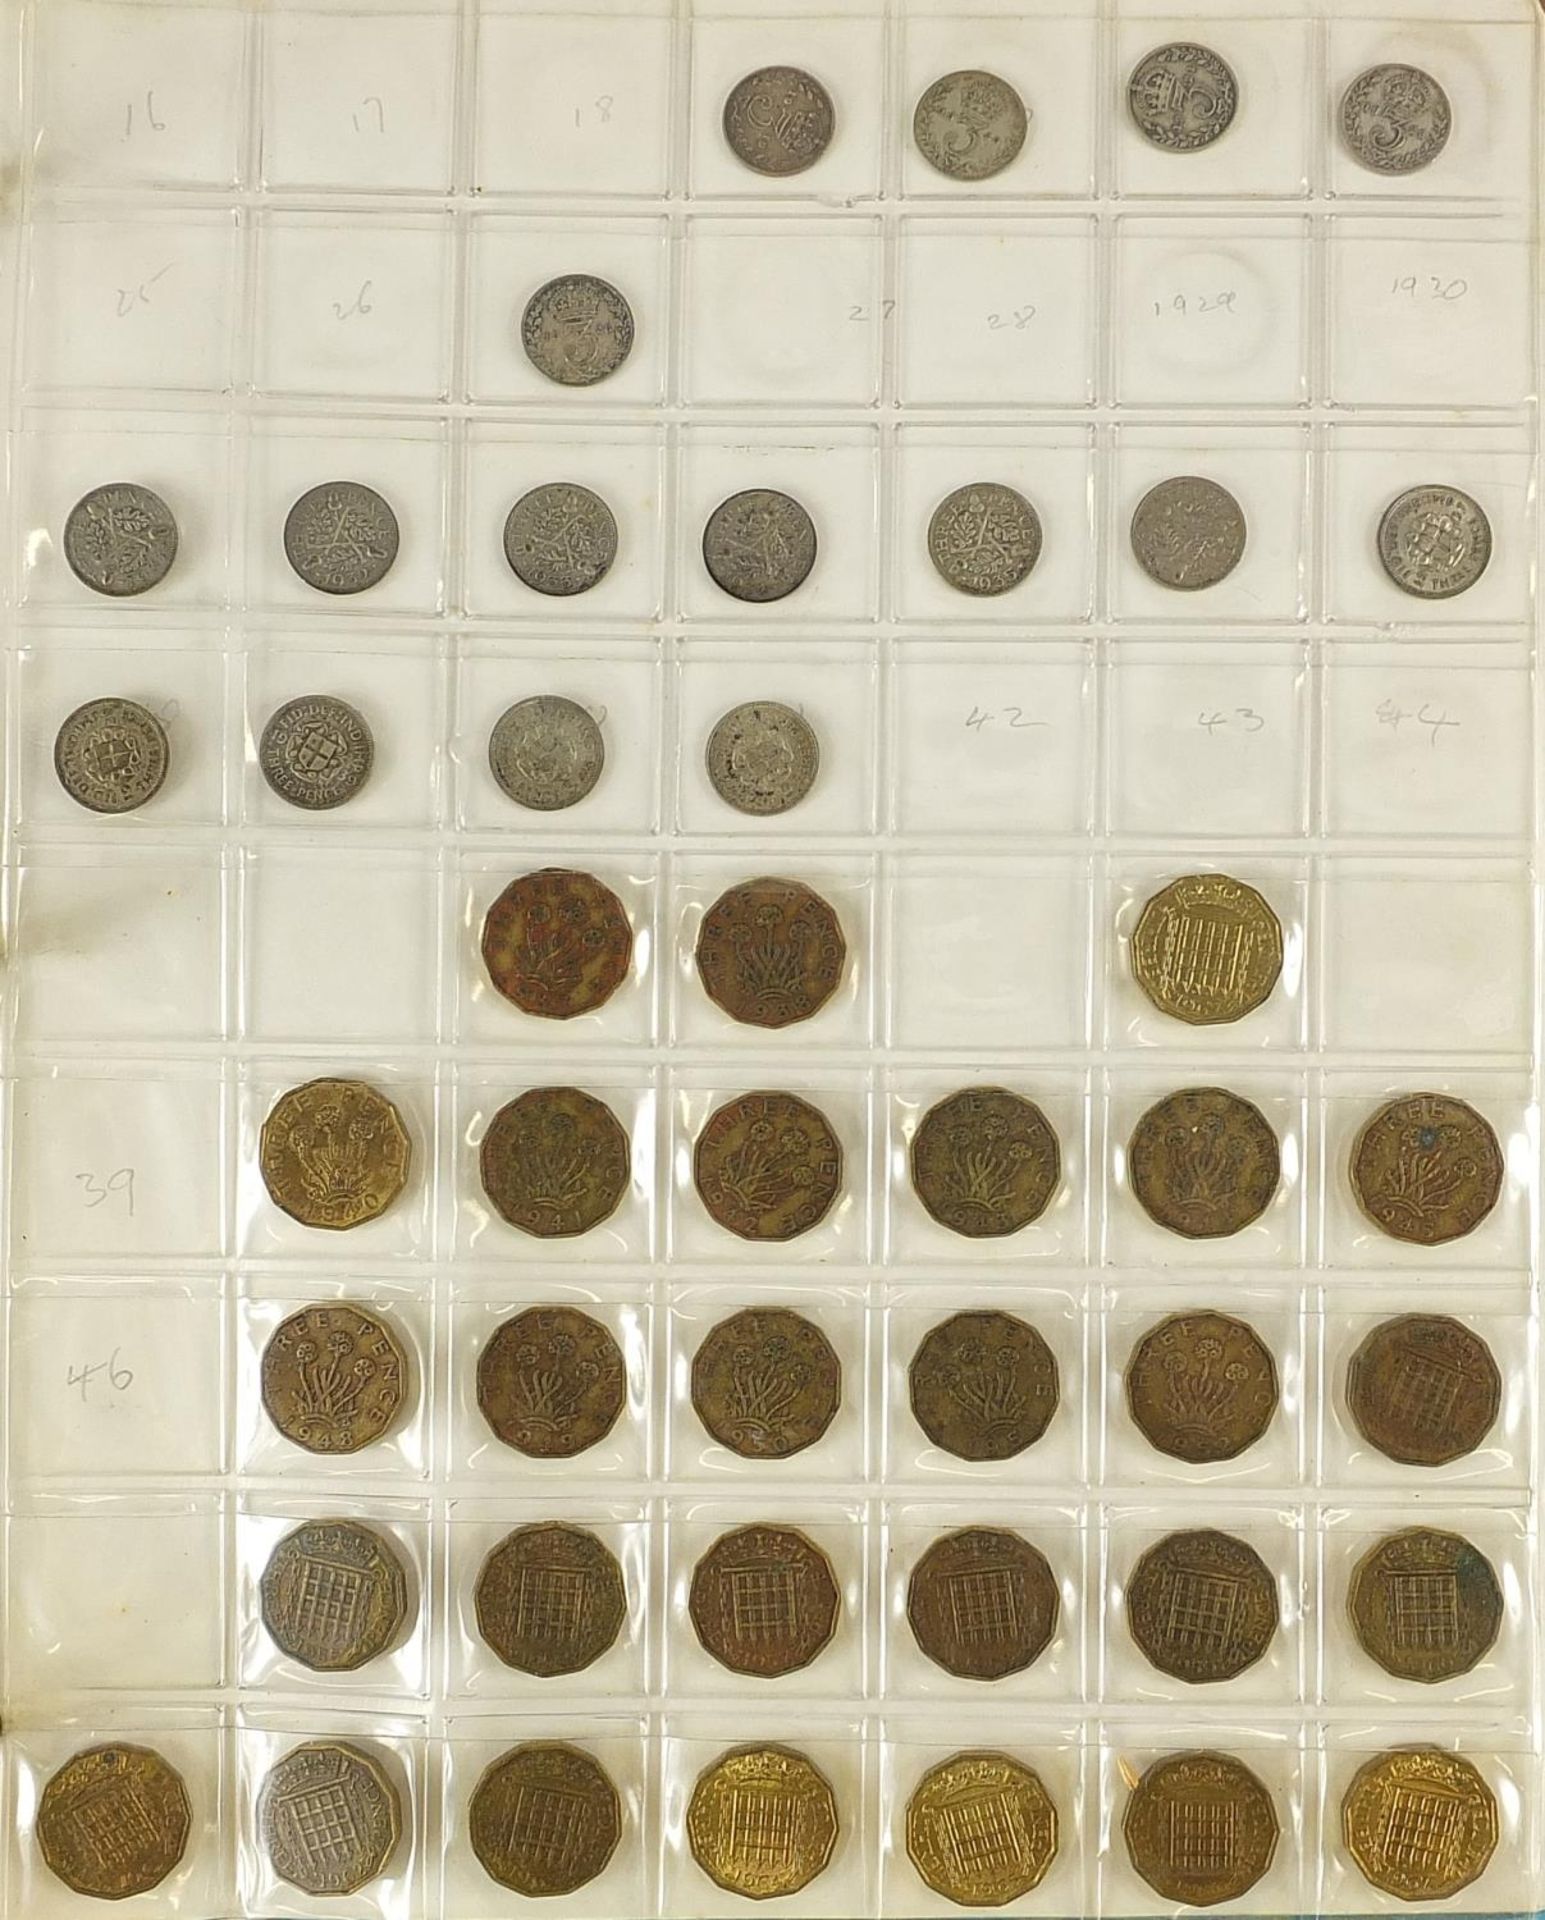 Victorian and later British coinage including silver threepenny bits arranged in an album